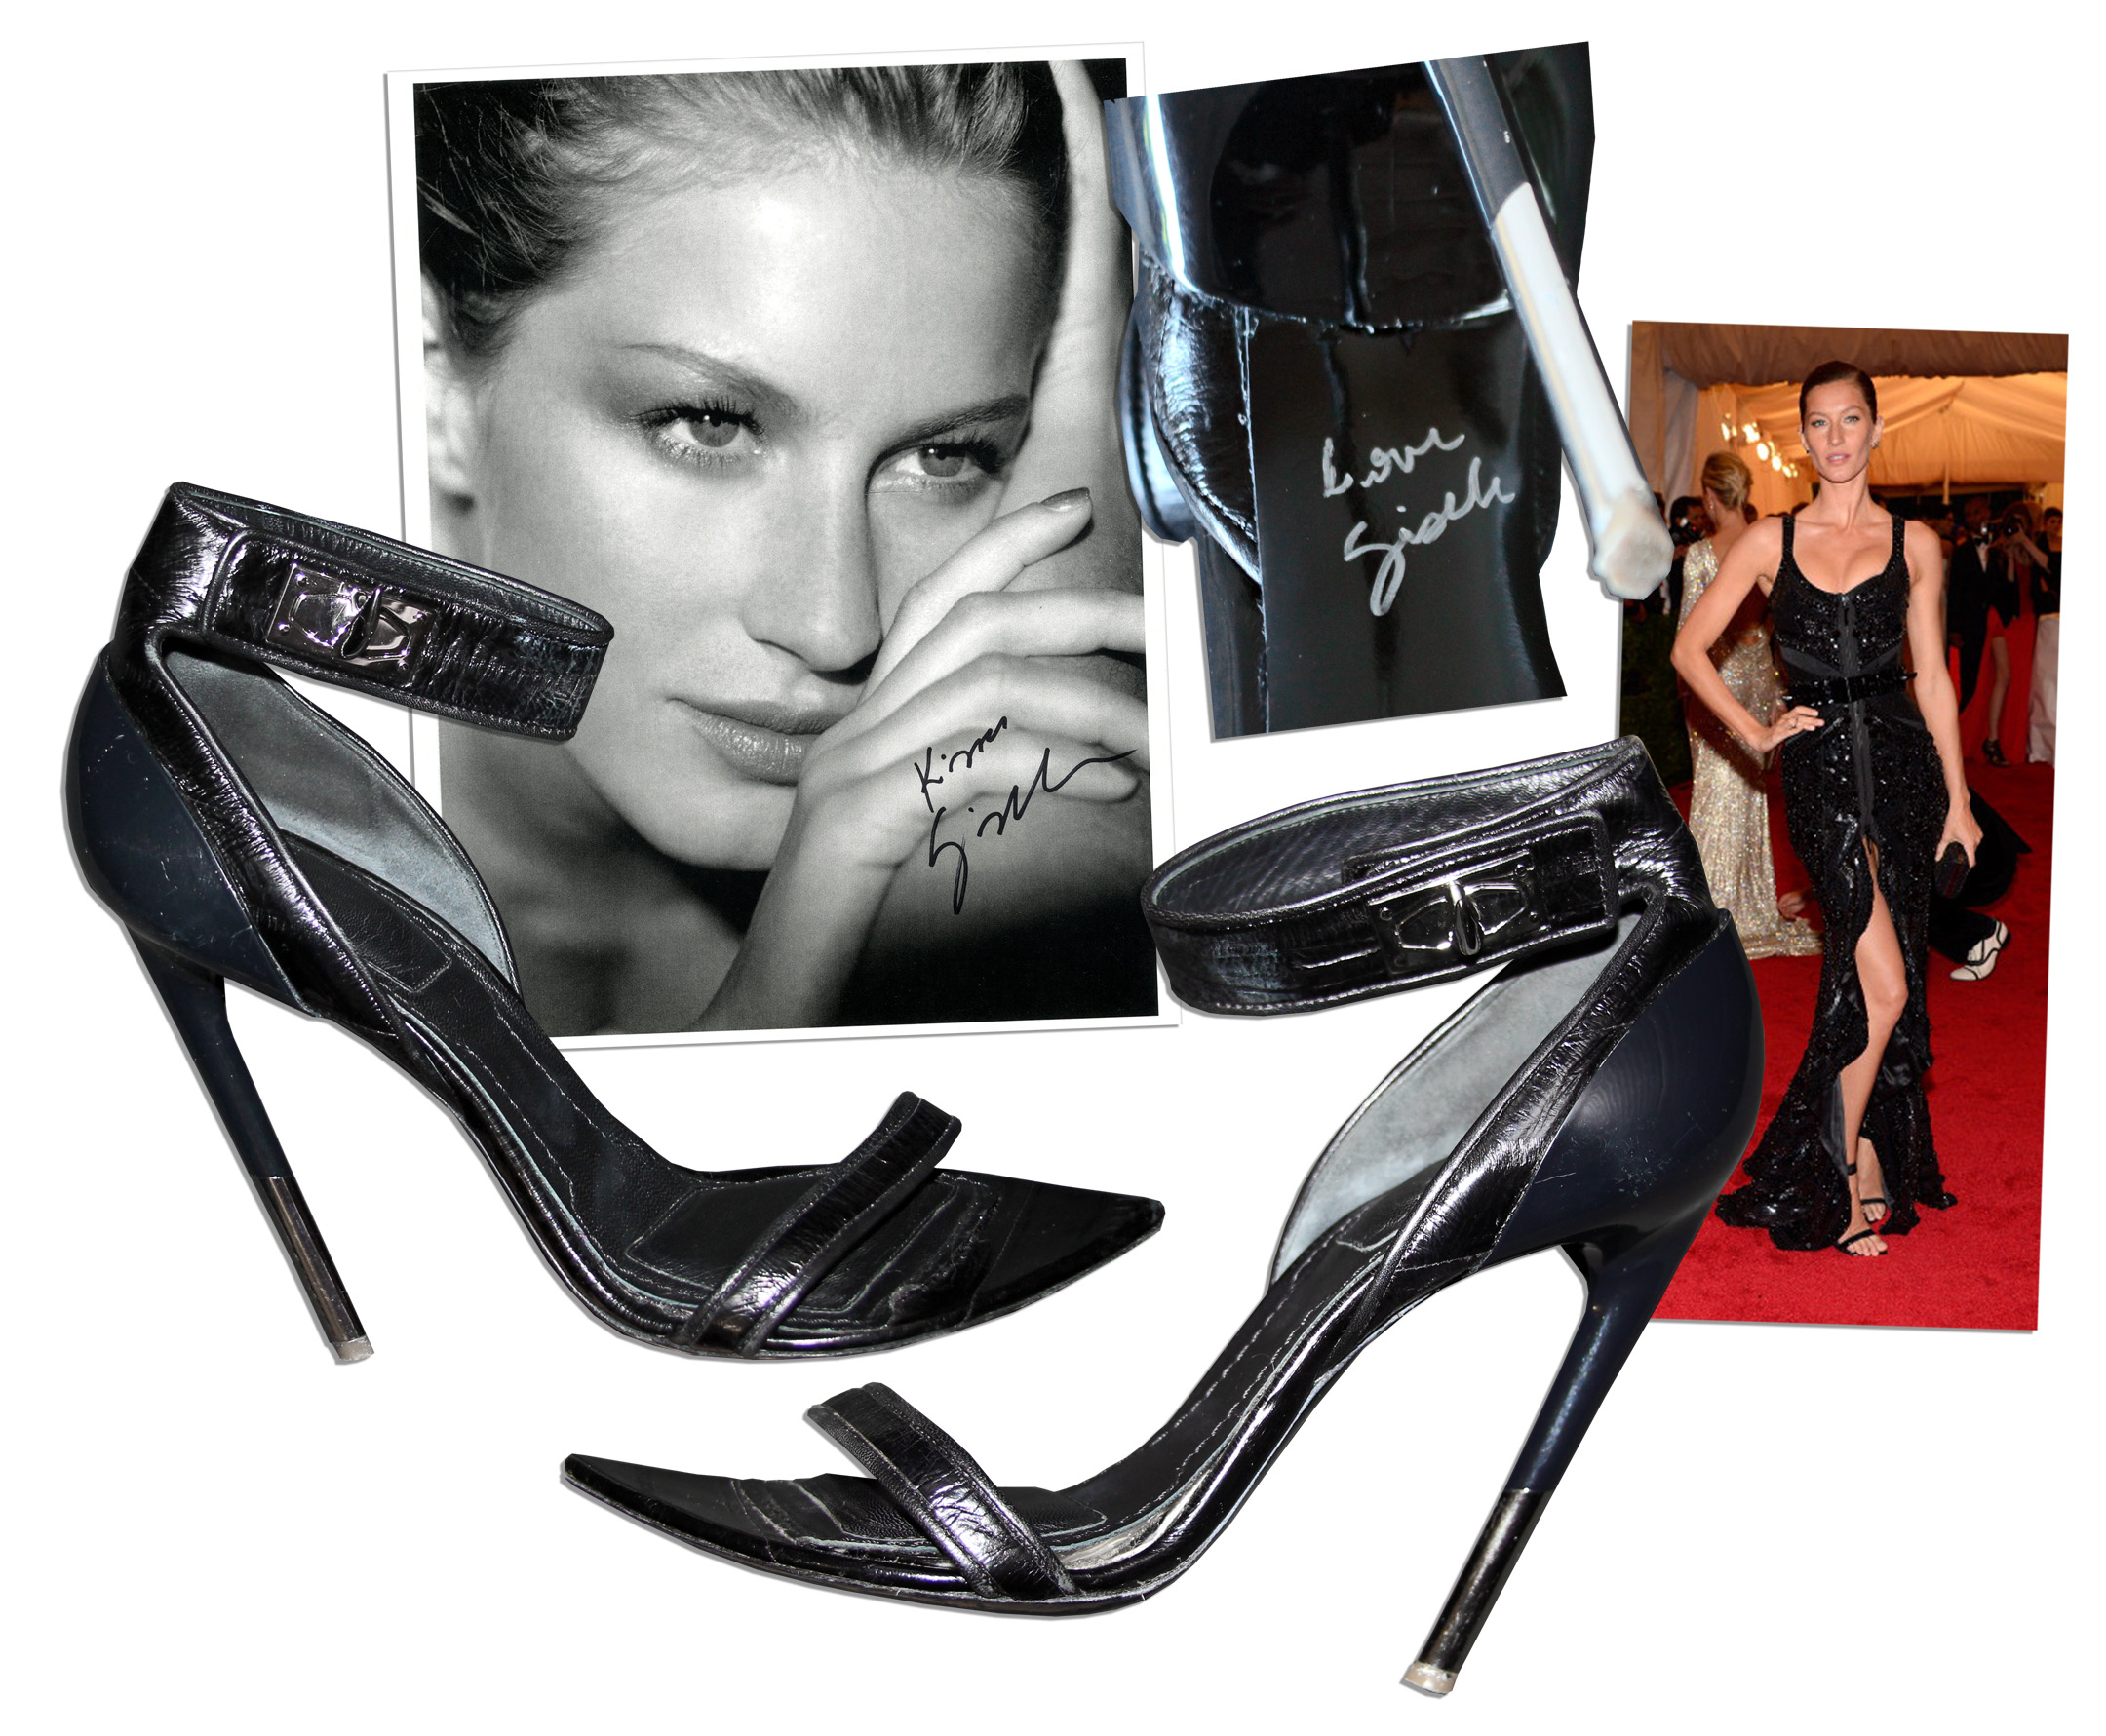 Lot Detail - Supermodel Gisele Bundchen Signed Givenchy Heels -- Worn to the 2012 Met Gala Tom Brady -- With 8'' x 10'' Signed Photo of Gisele